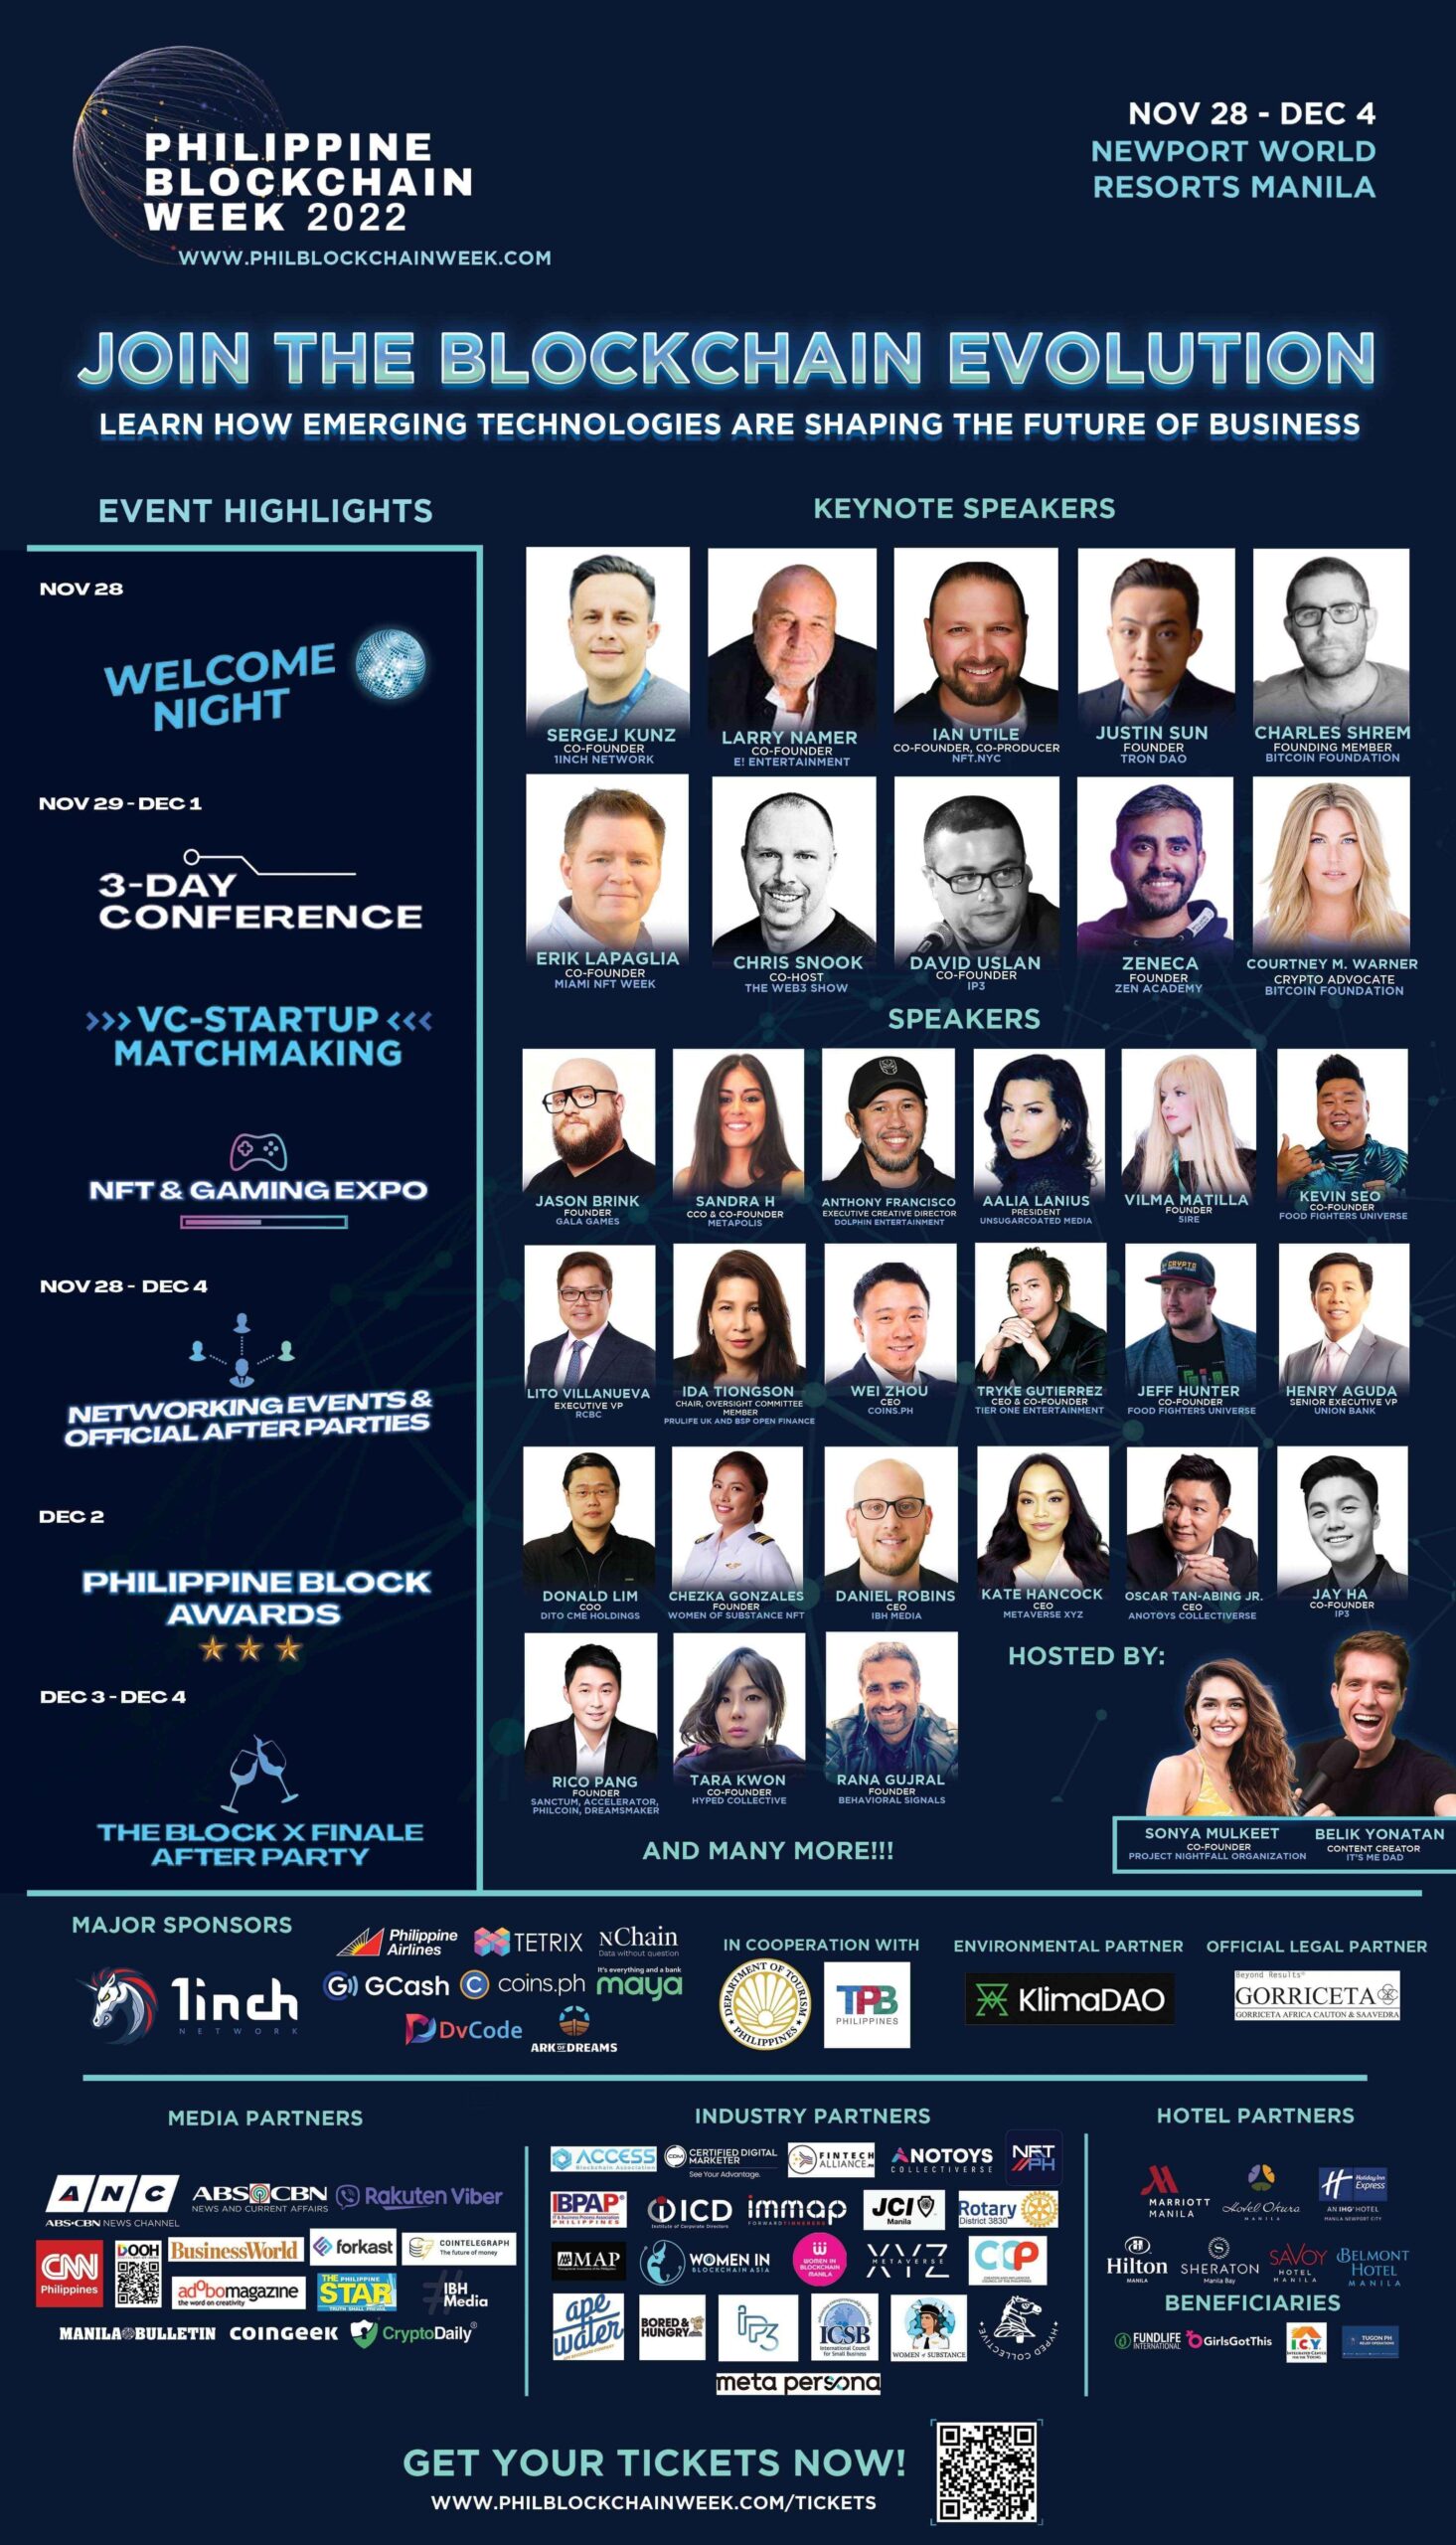 hollywood-producers-and-creators-among-keynote-speakers-at-philippine-blockchain-week-1